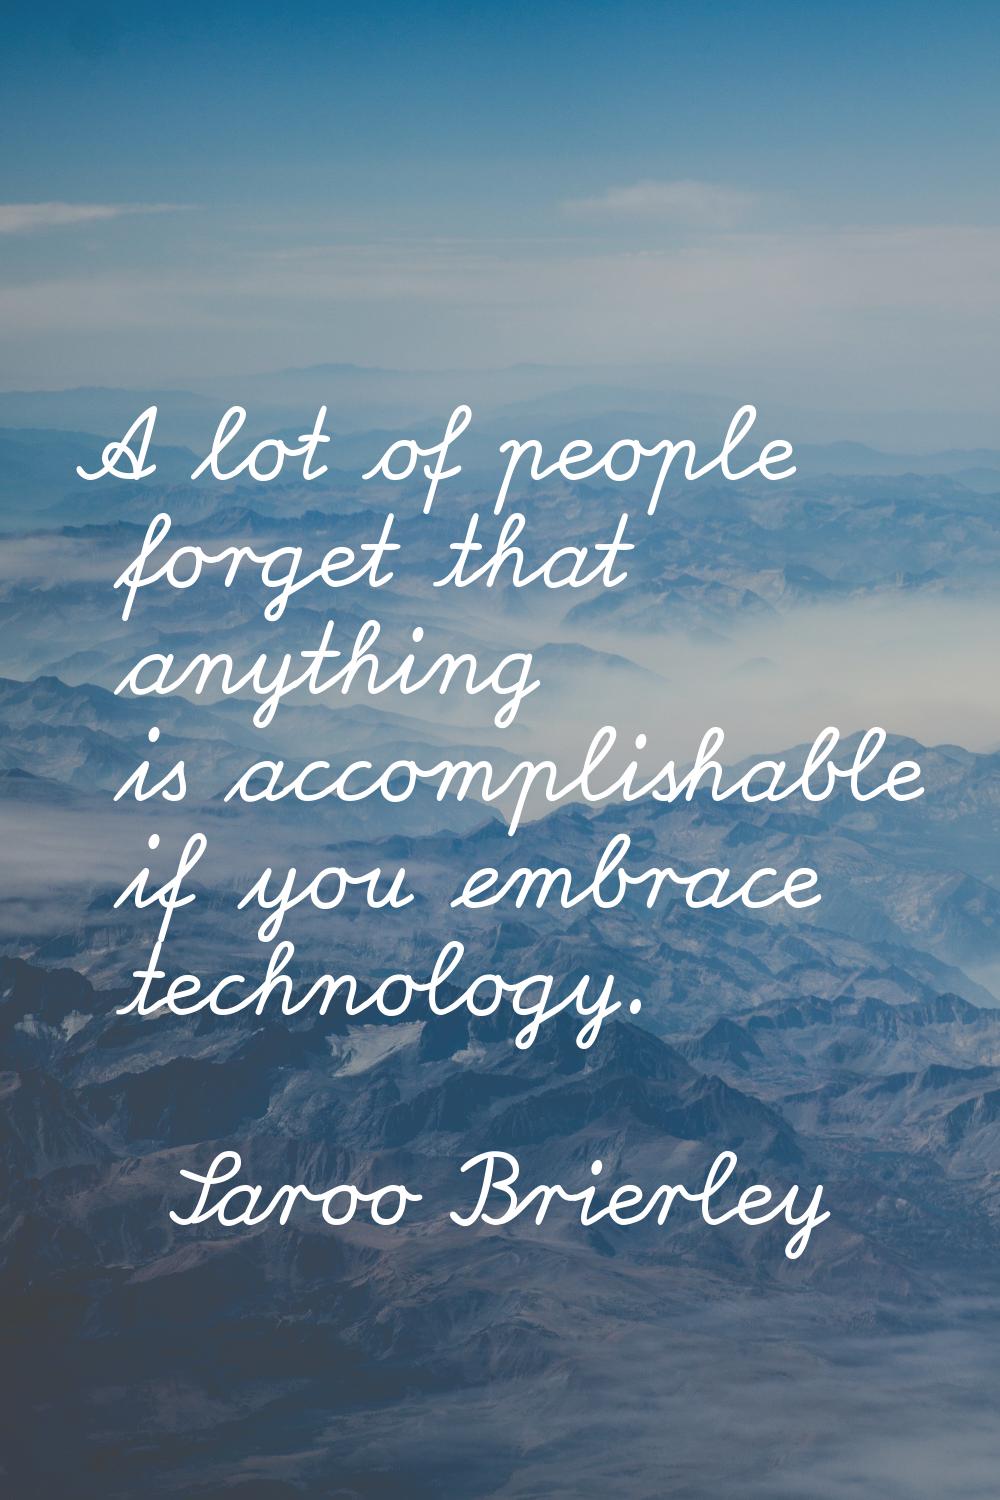 A lot of people forget that anything is accomplishable if you embrace technology.